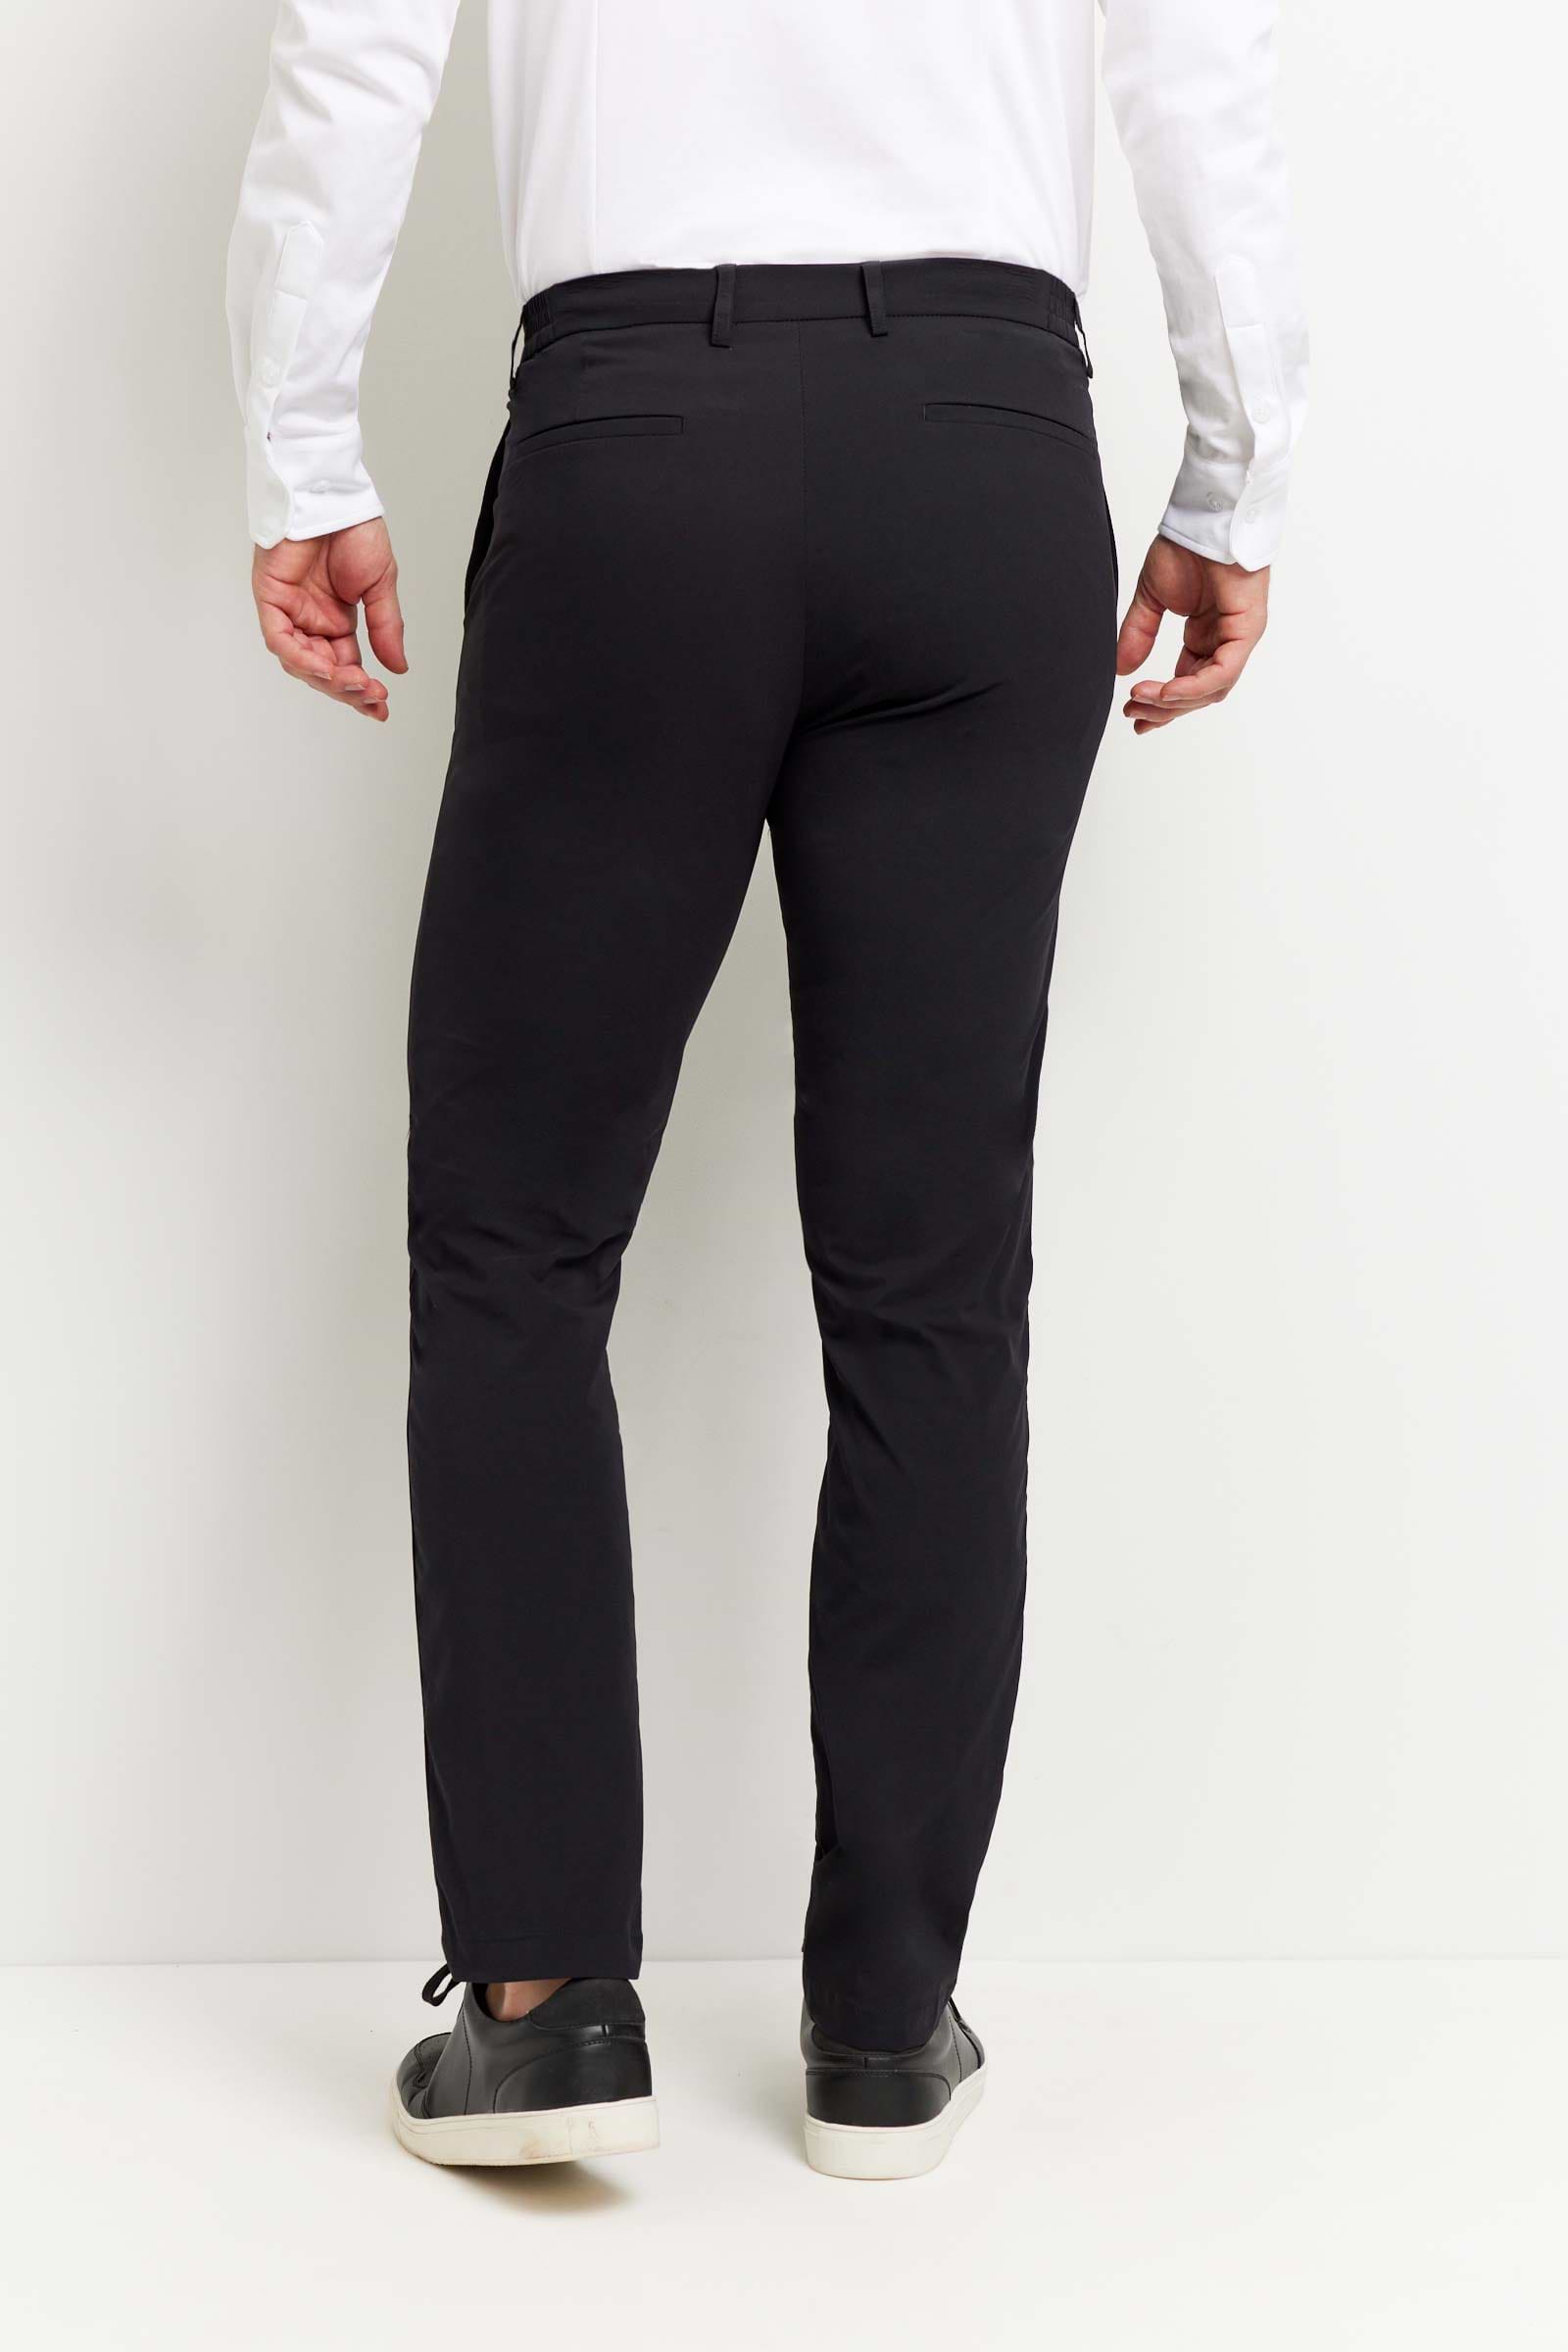 The Best Travel Pant. Man Showing the Back Profile of a Men's Stewart Pant in Black.